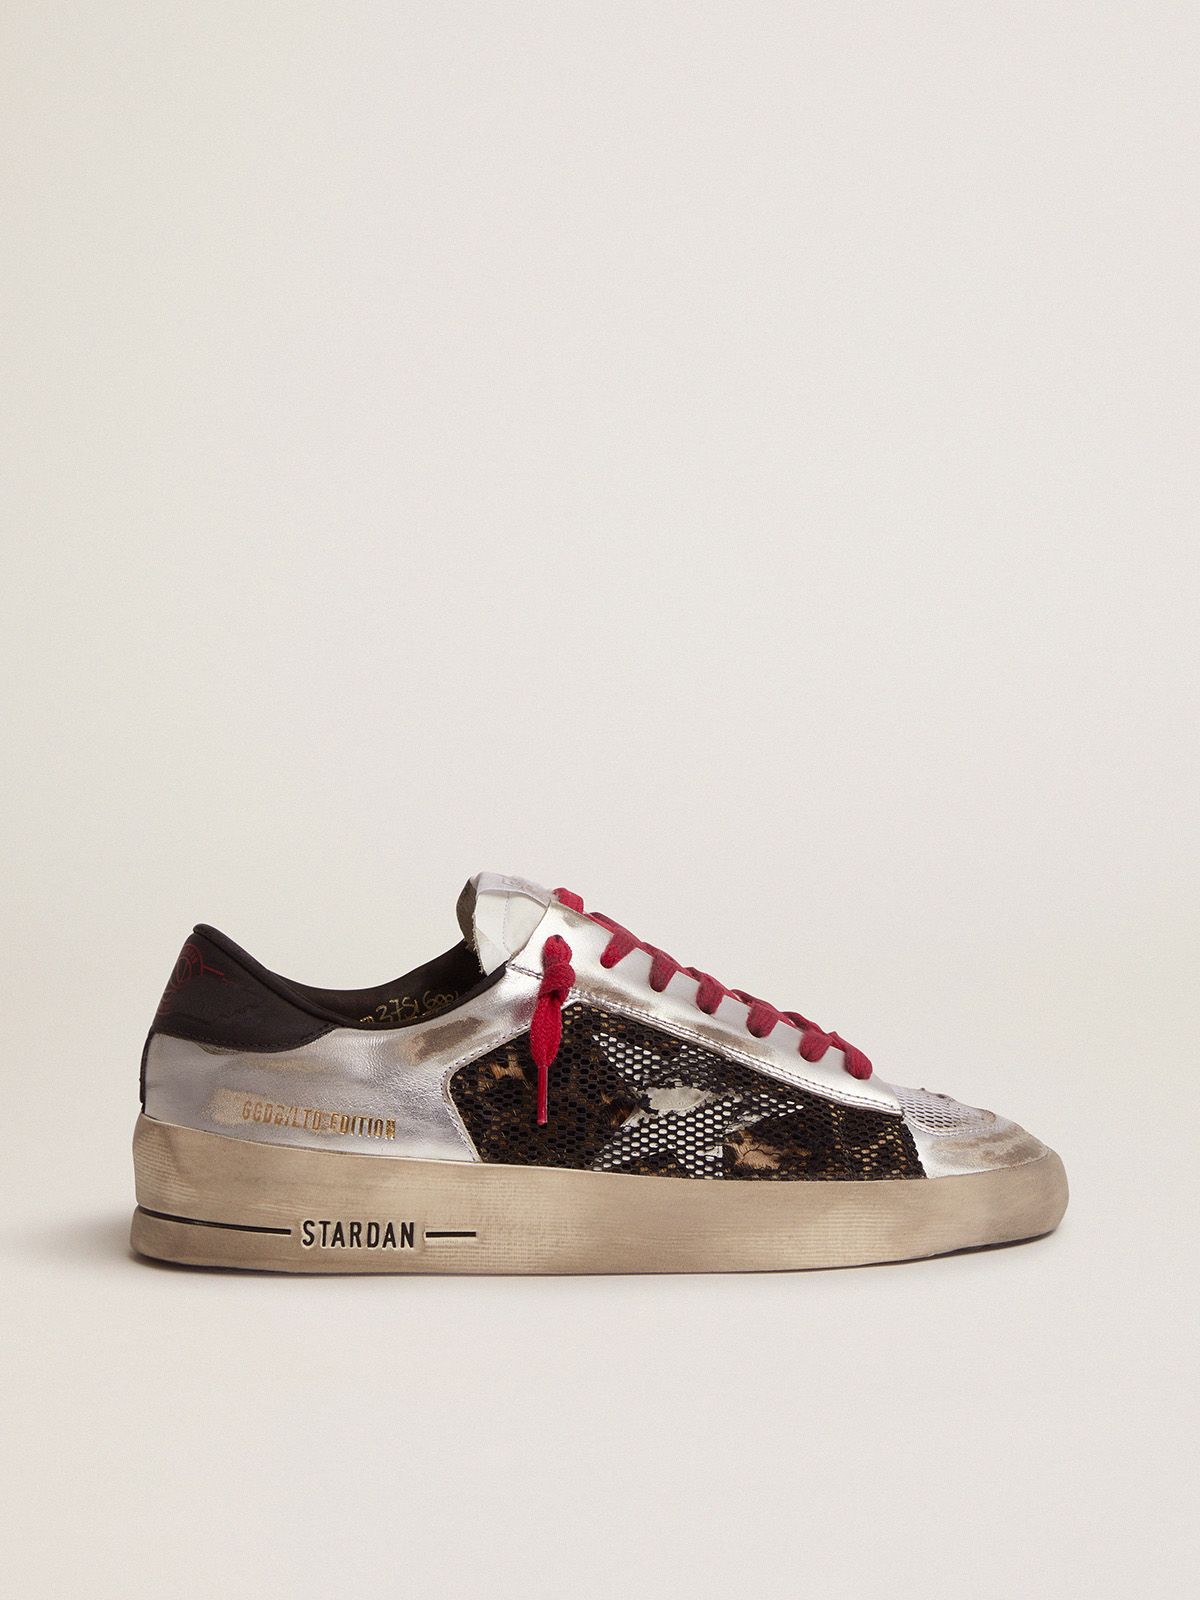 Women's Limited Edition LAB silver and animal-print Stardan sneakers | 